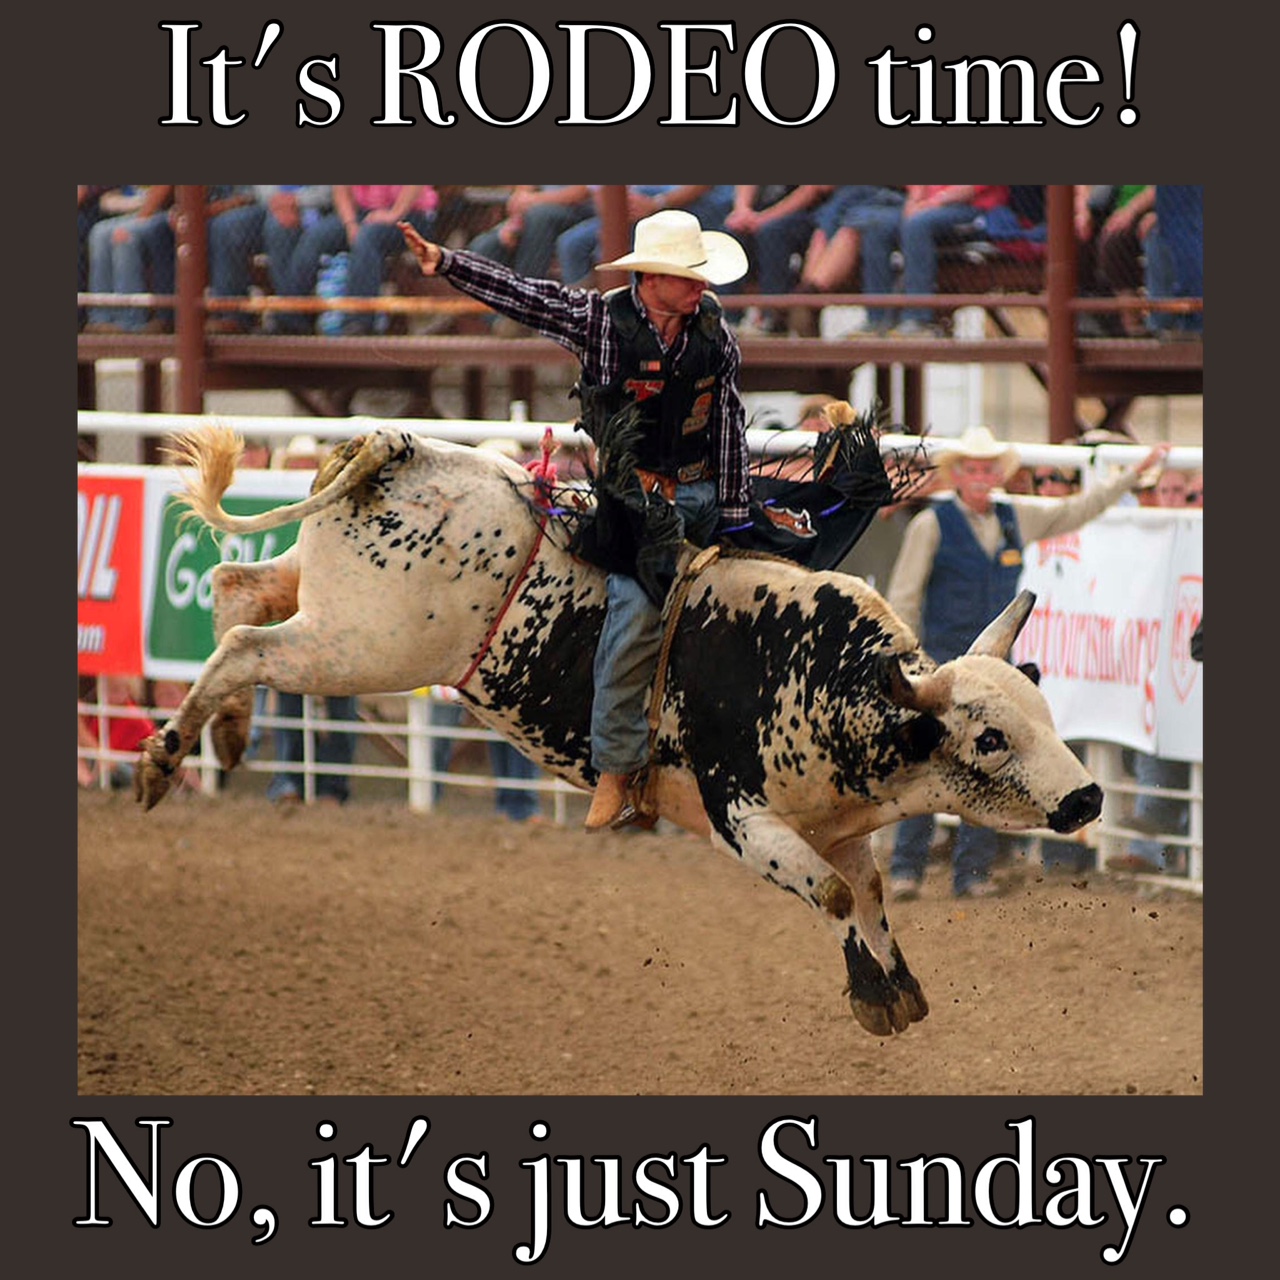 The rodeo is a really exciting event